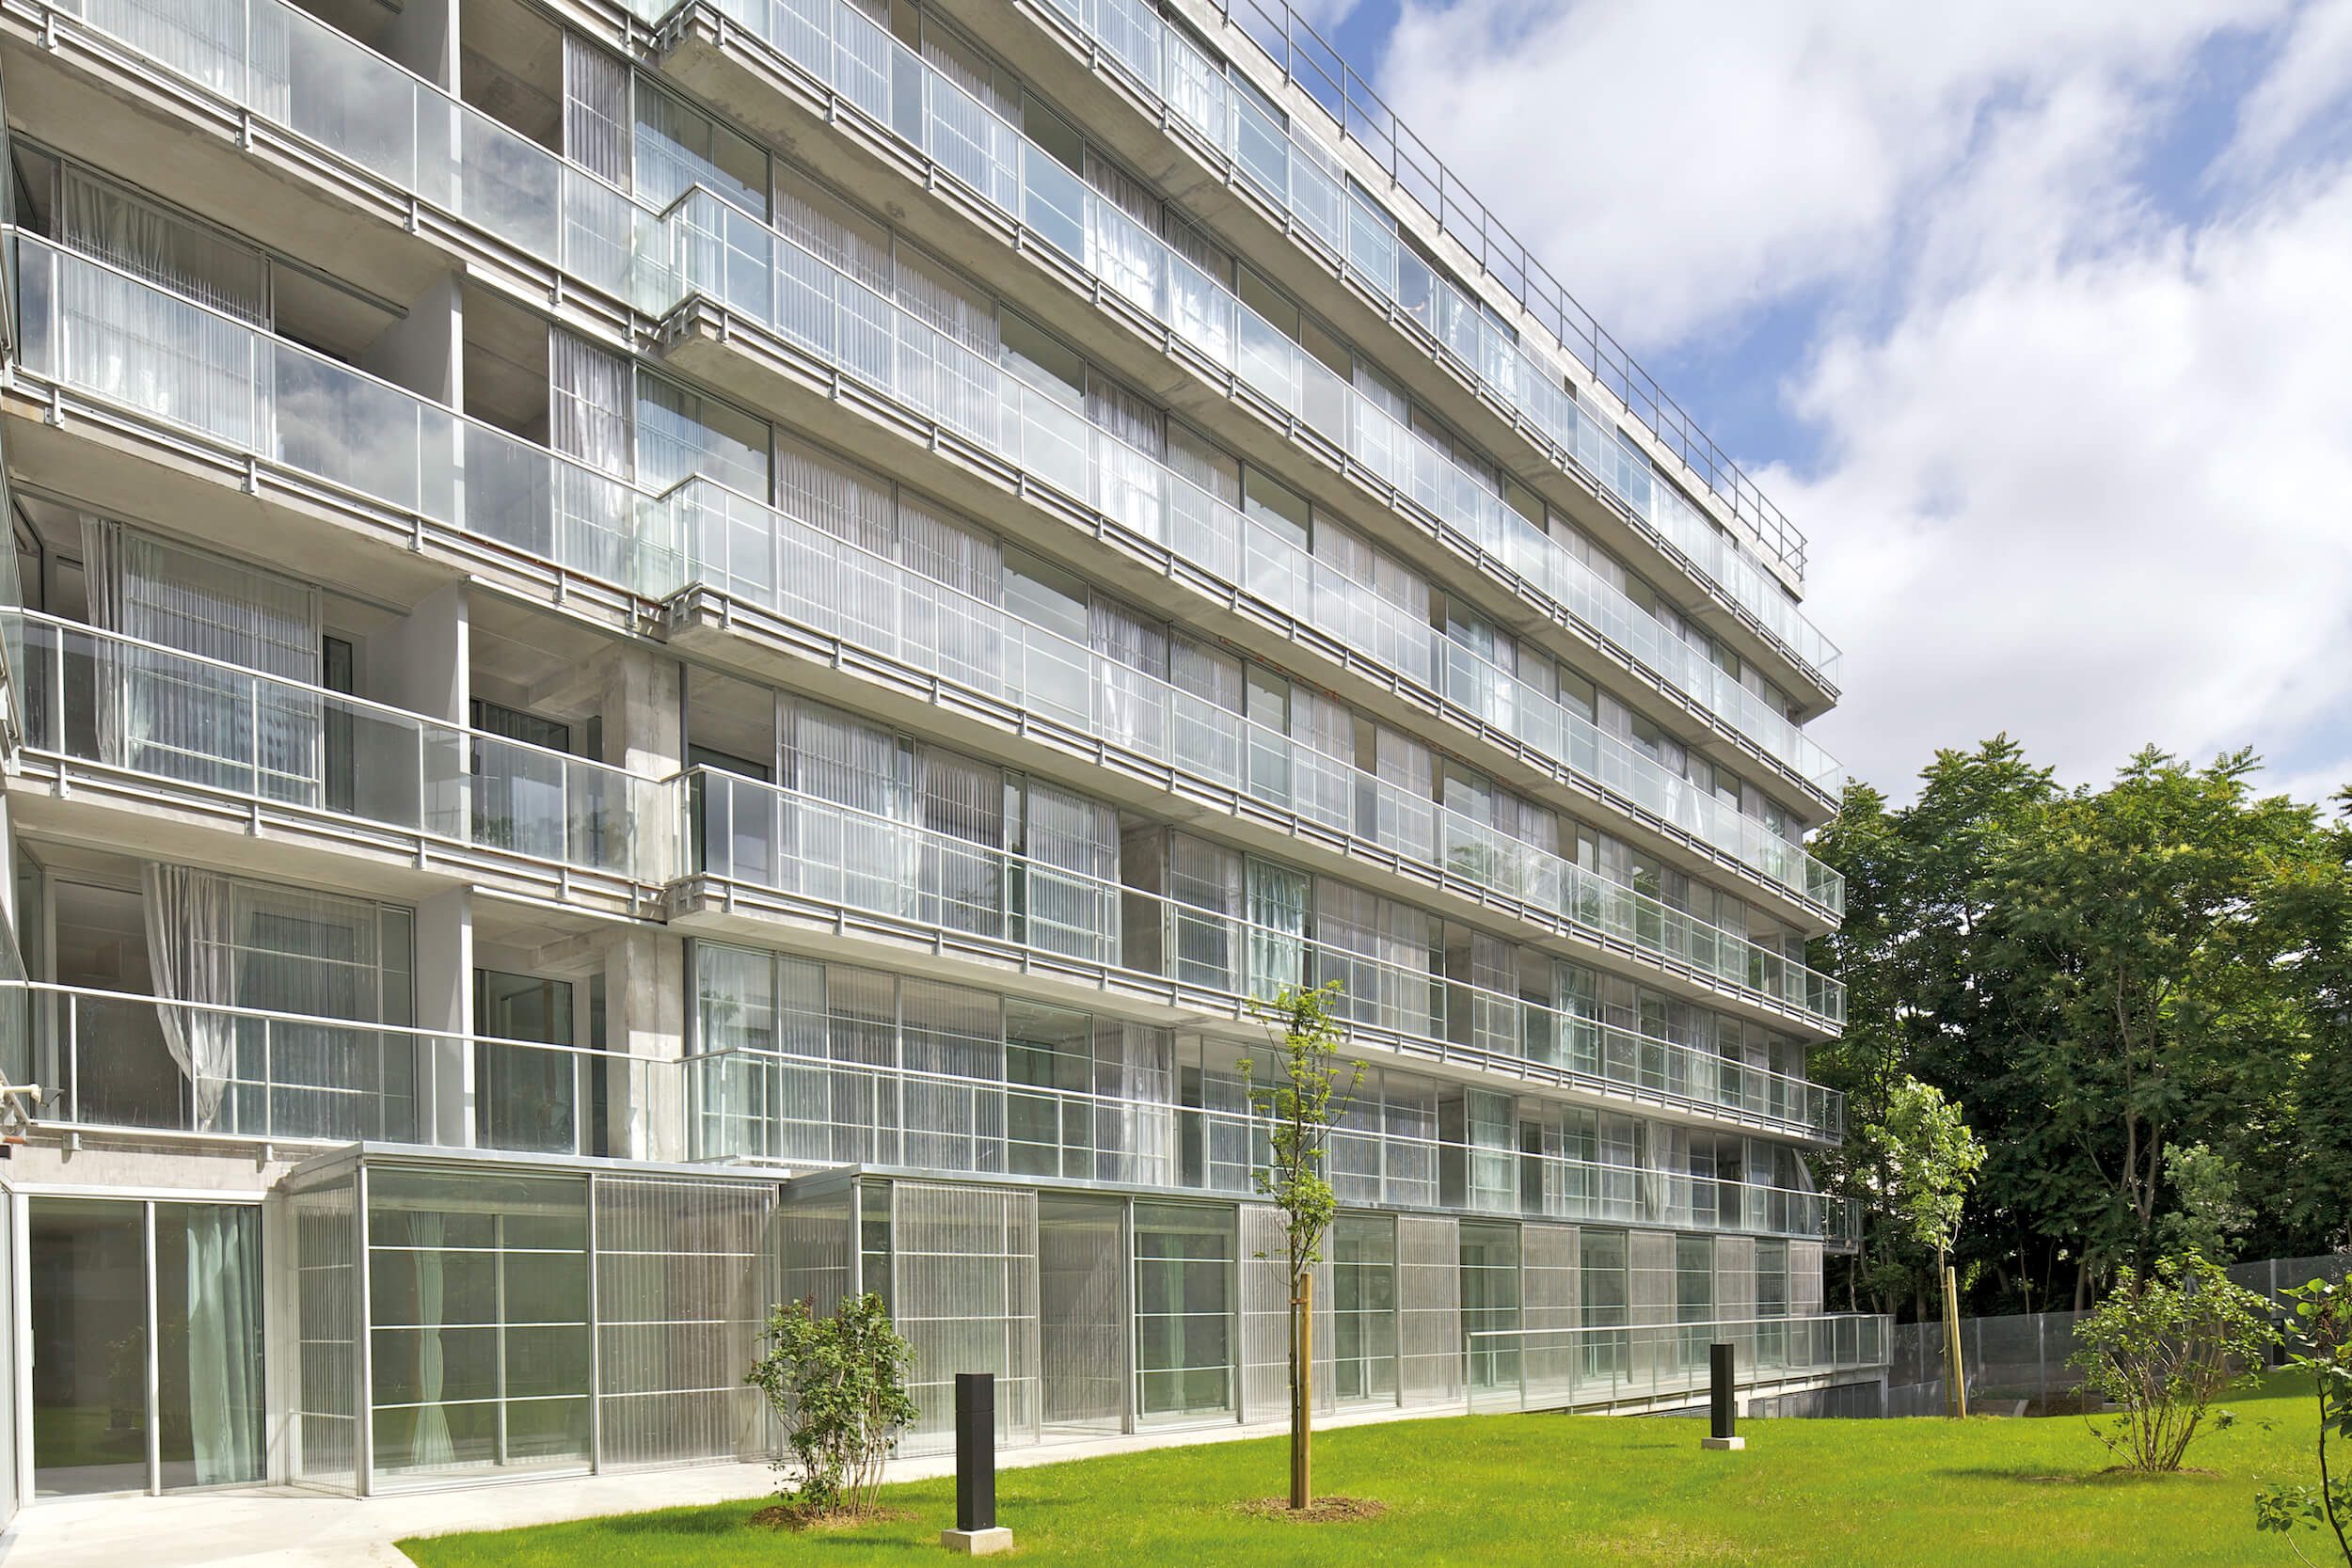 glass exterior of a student housing building in france